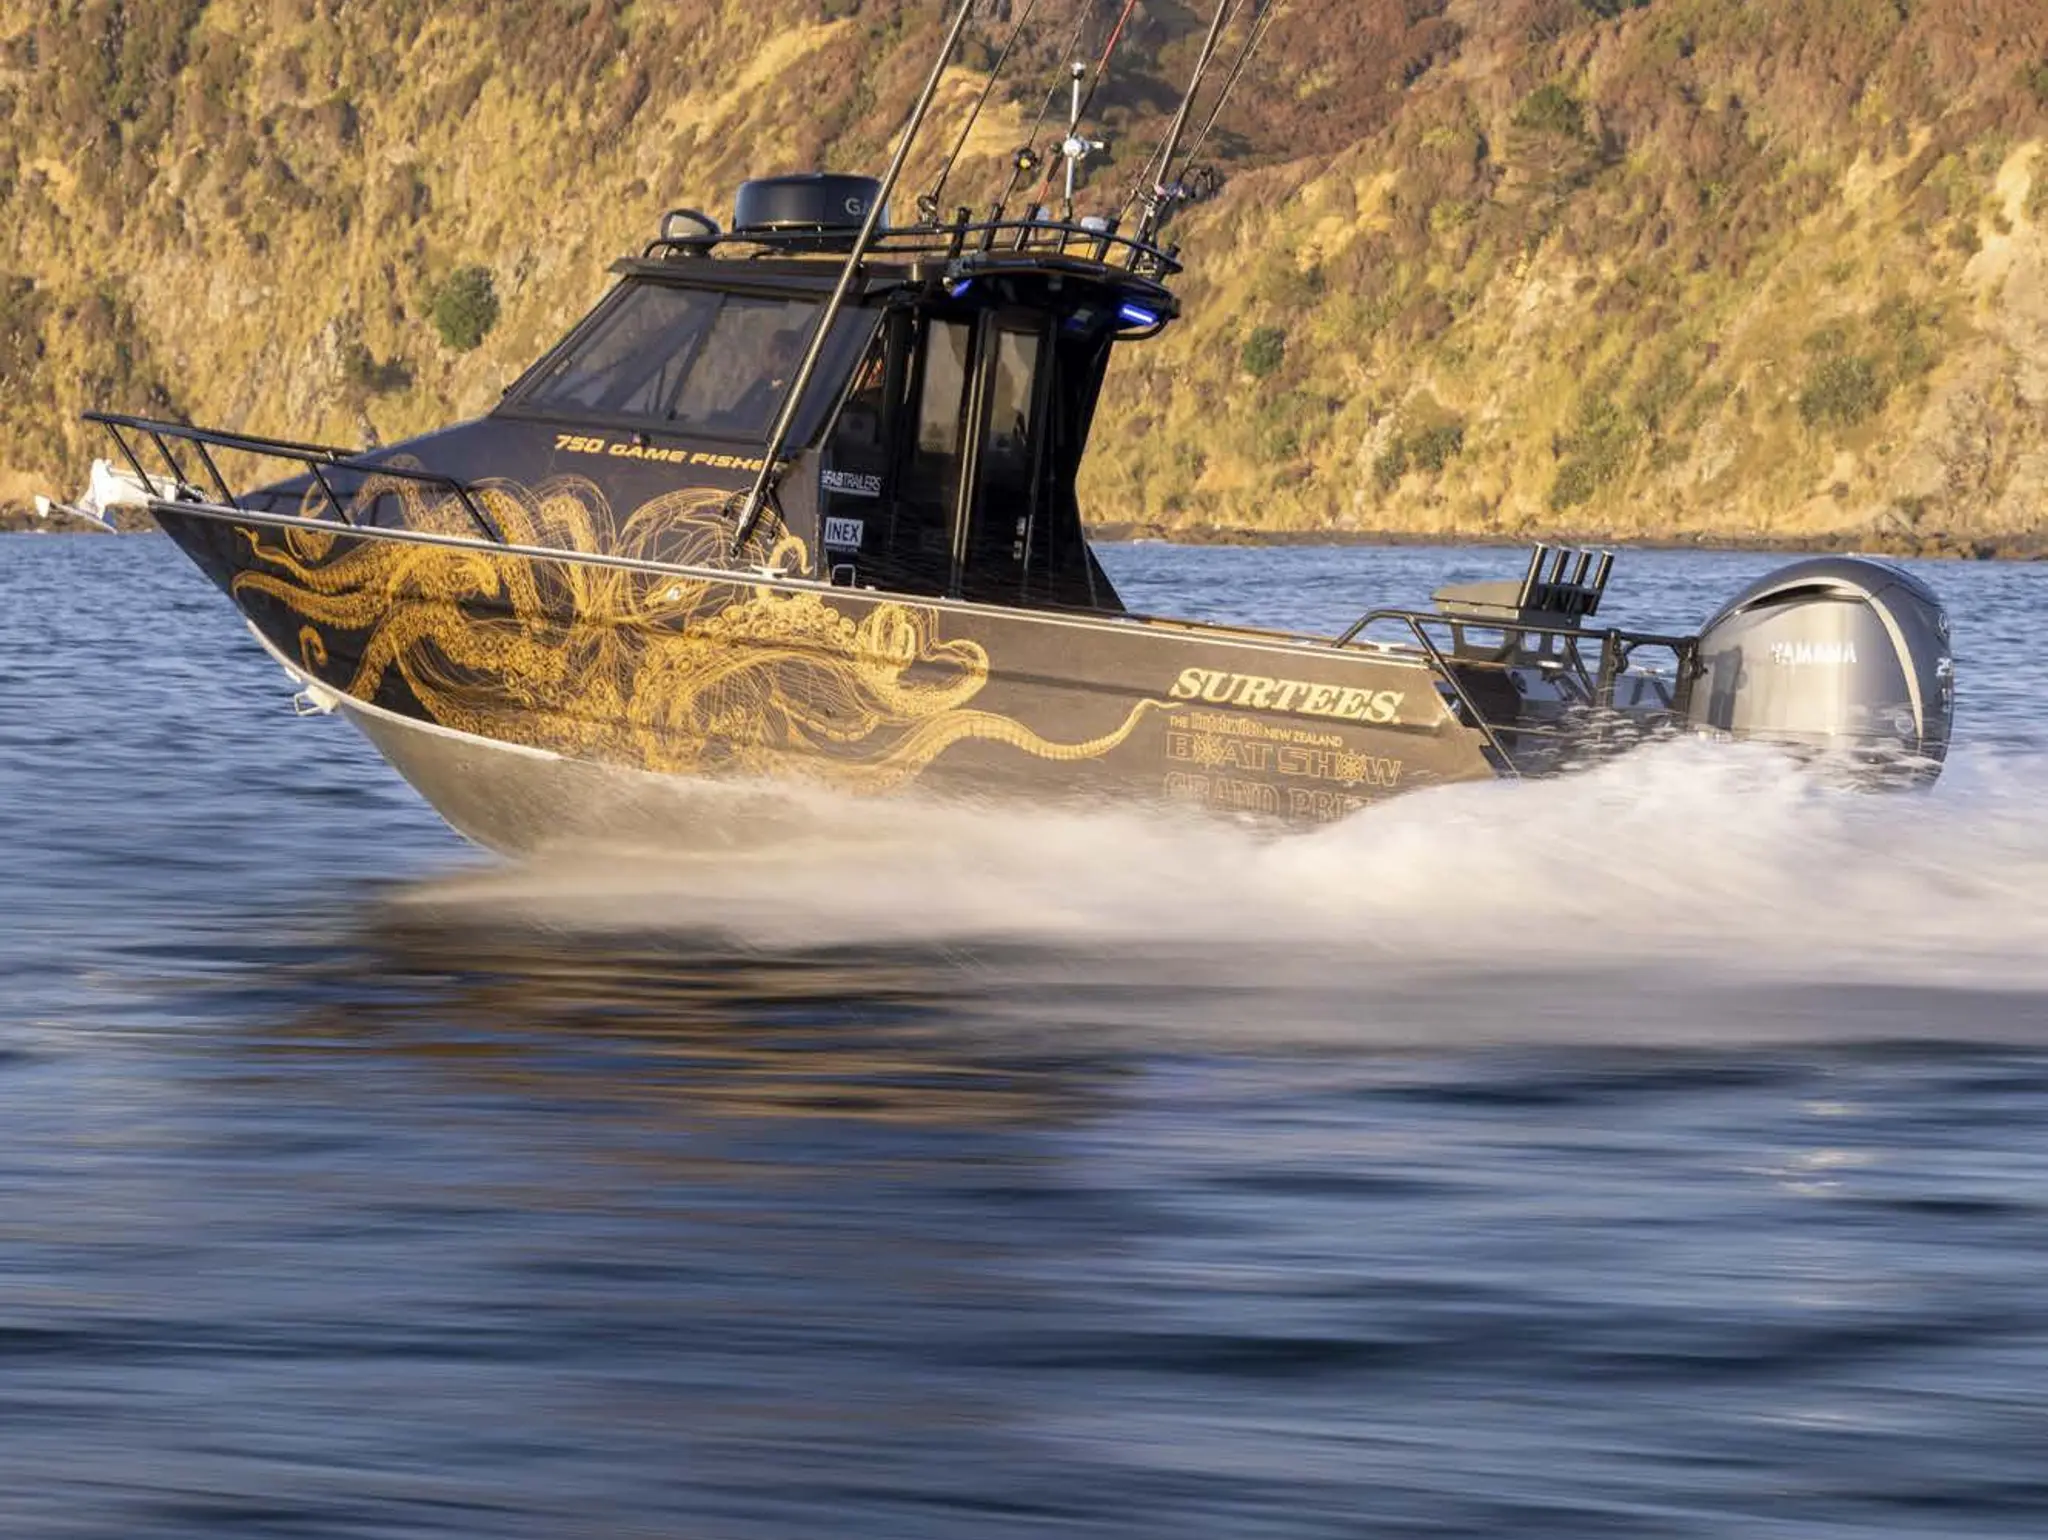 Show Preview: HUTCHWILCO NEW ZEALAND BOAT SHOW